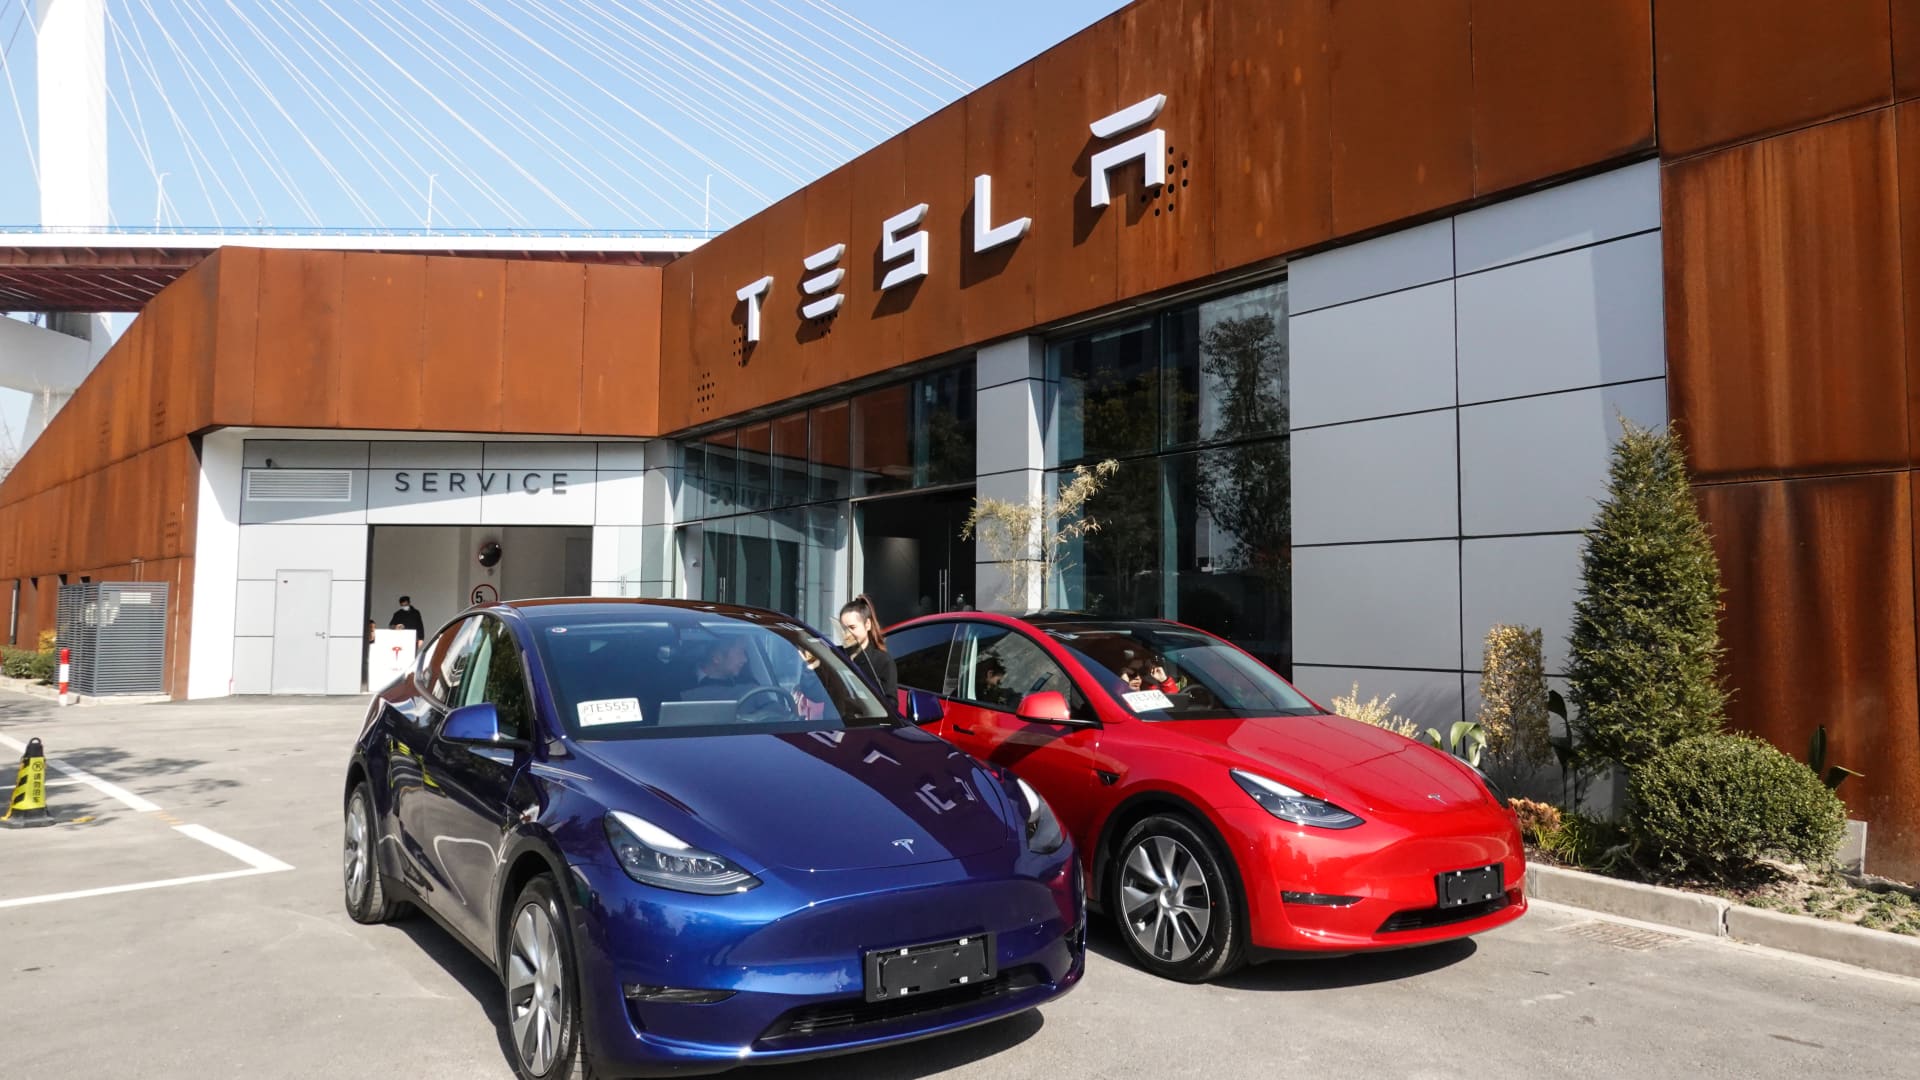 Tesla's Model Y compact crossover vehicles at a showroom in Shanghai, China, on January 18, 2021.